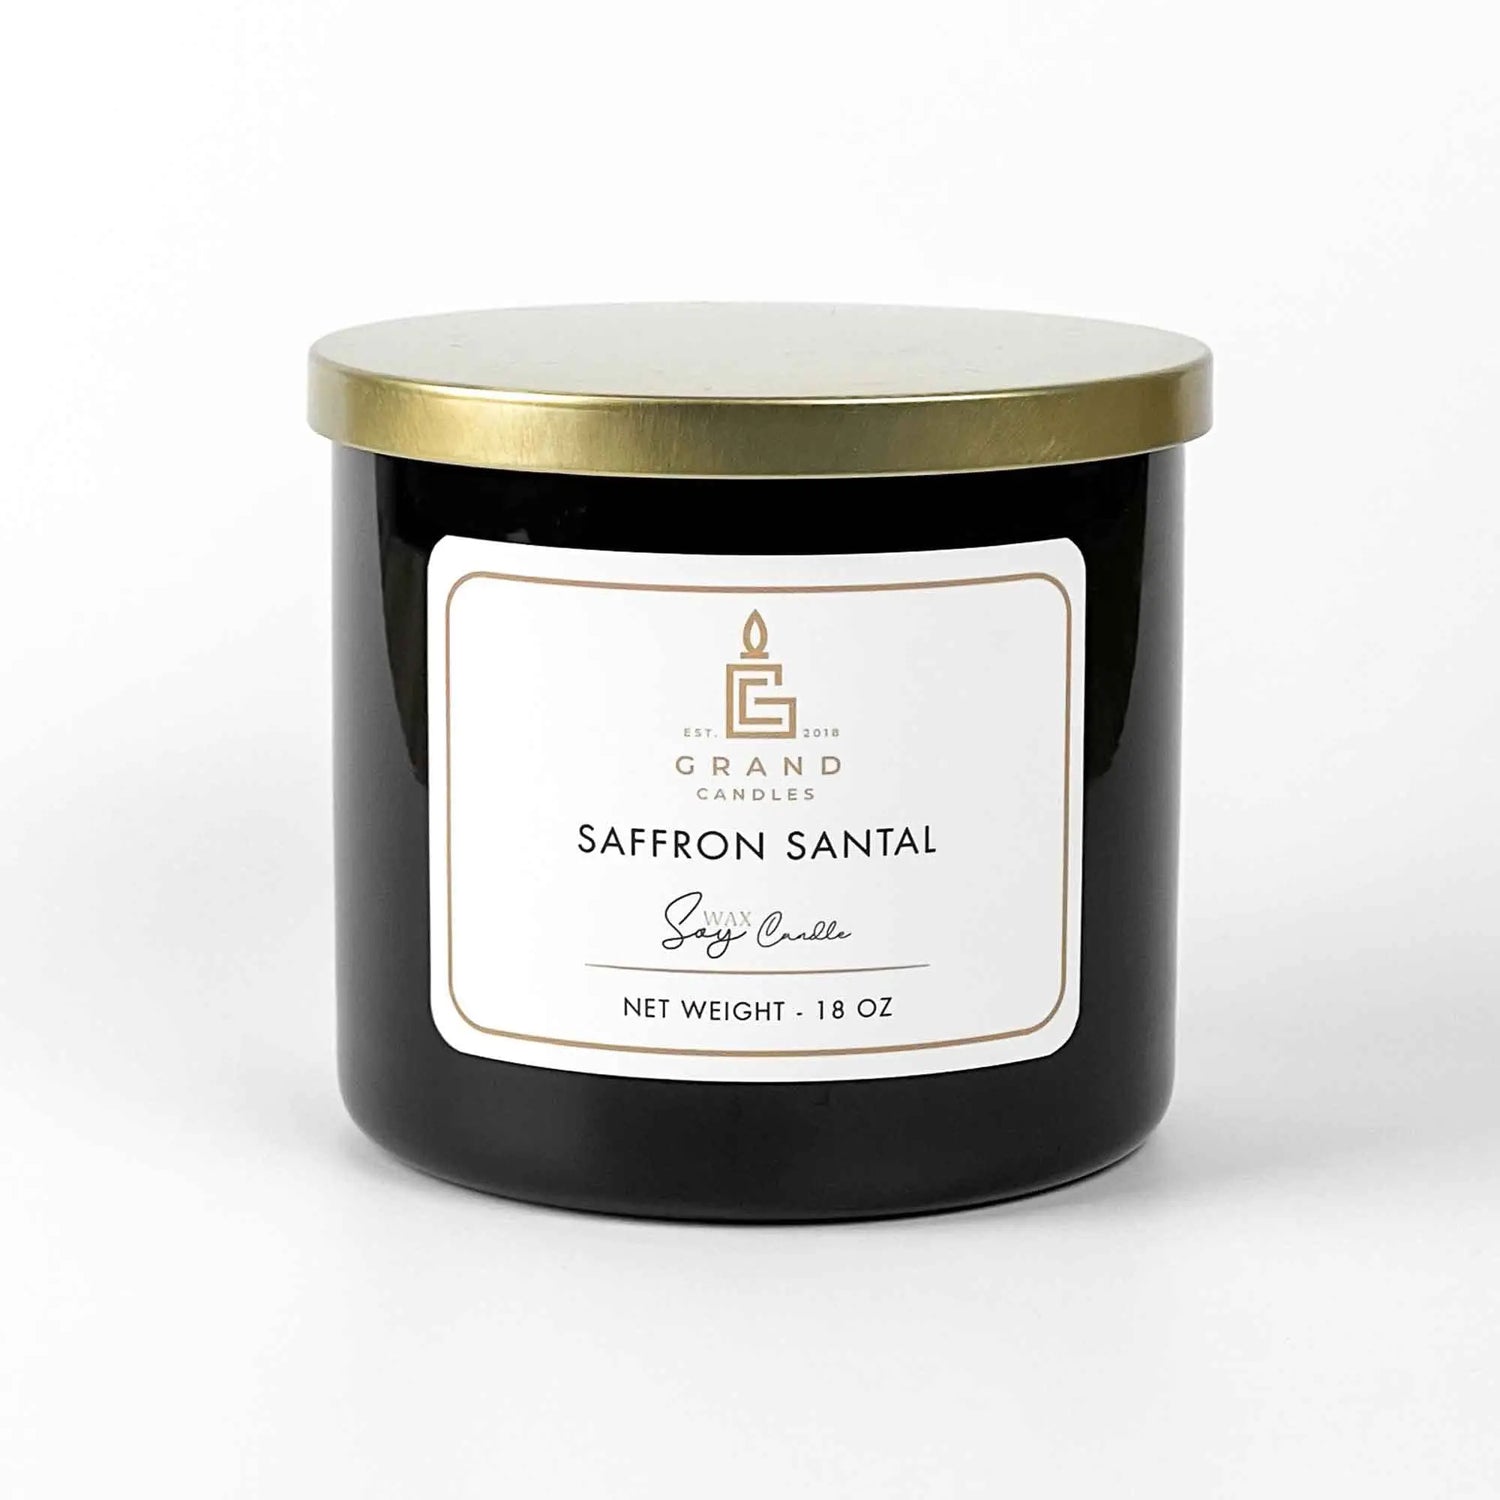 Scented Soy Wax Candle | Saffron Santal Soy Candle | Handcrafted Aromatherapy Home Fragrance